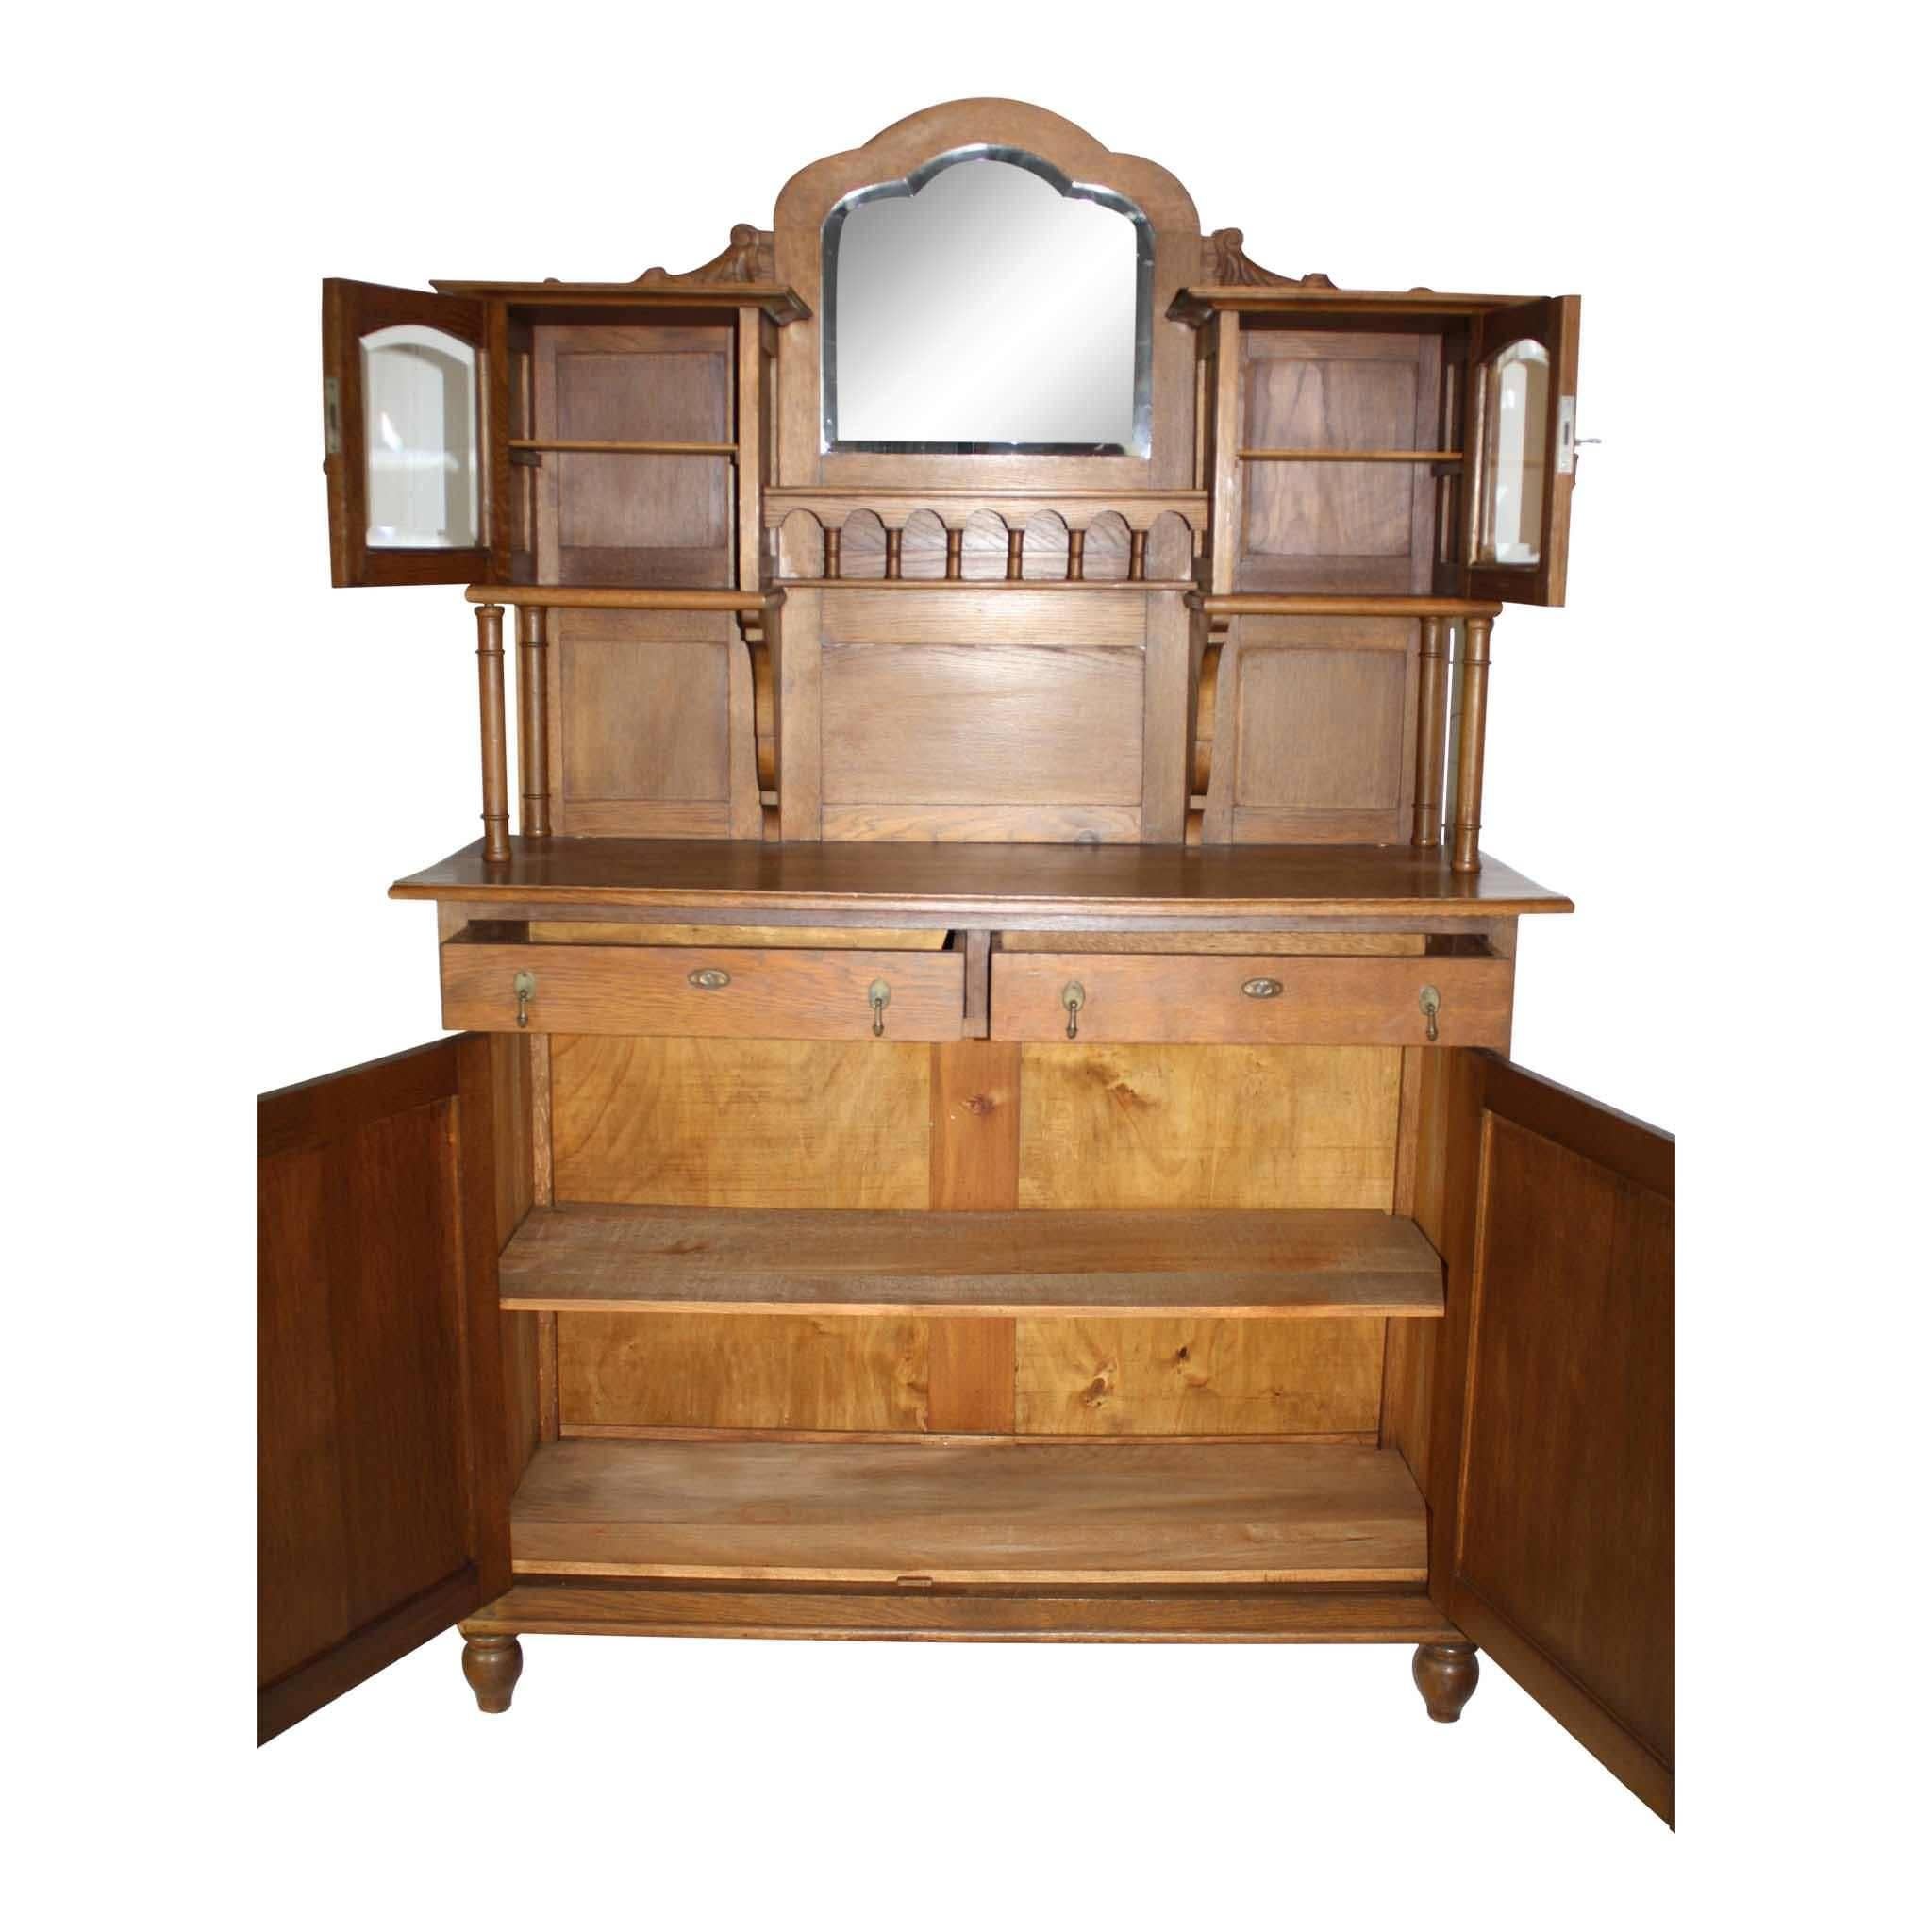 The upper gallery of this oak buffet consists of a beveled mirror with two-glass doors on either side. The gallery is supported by candlestick risers and decorative brackets. The lower portion of the buffet is comprised of two drawers above double